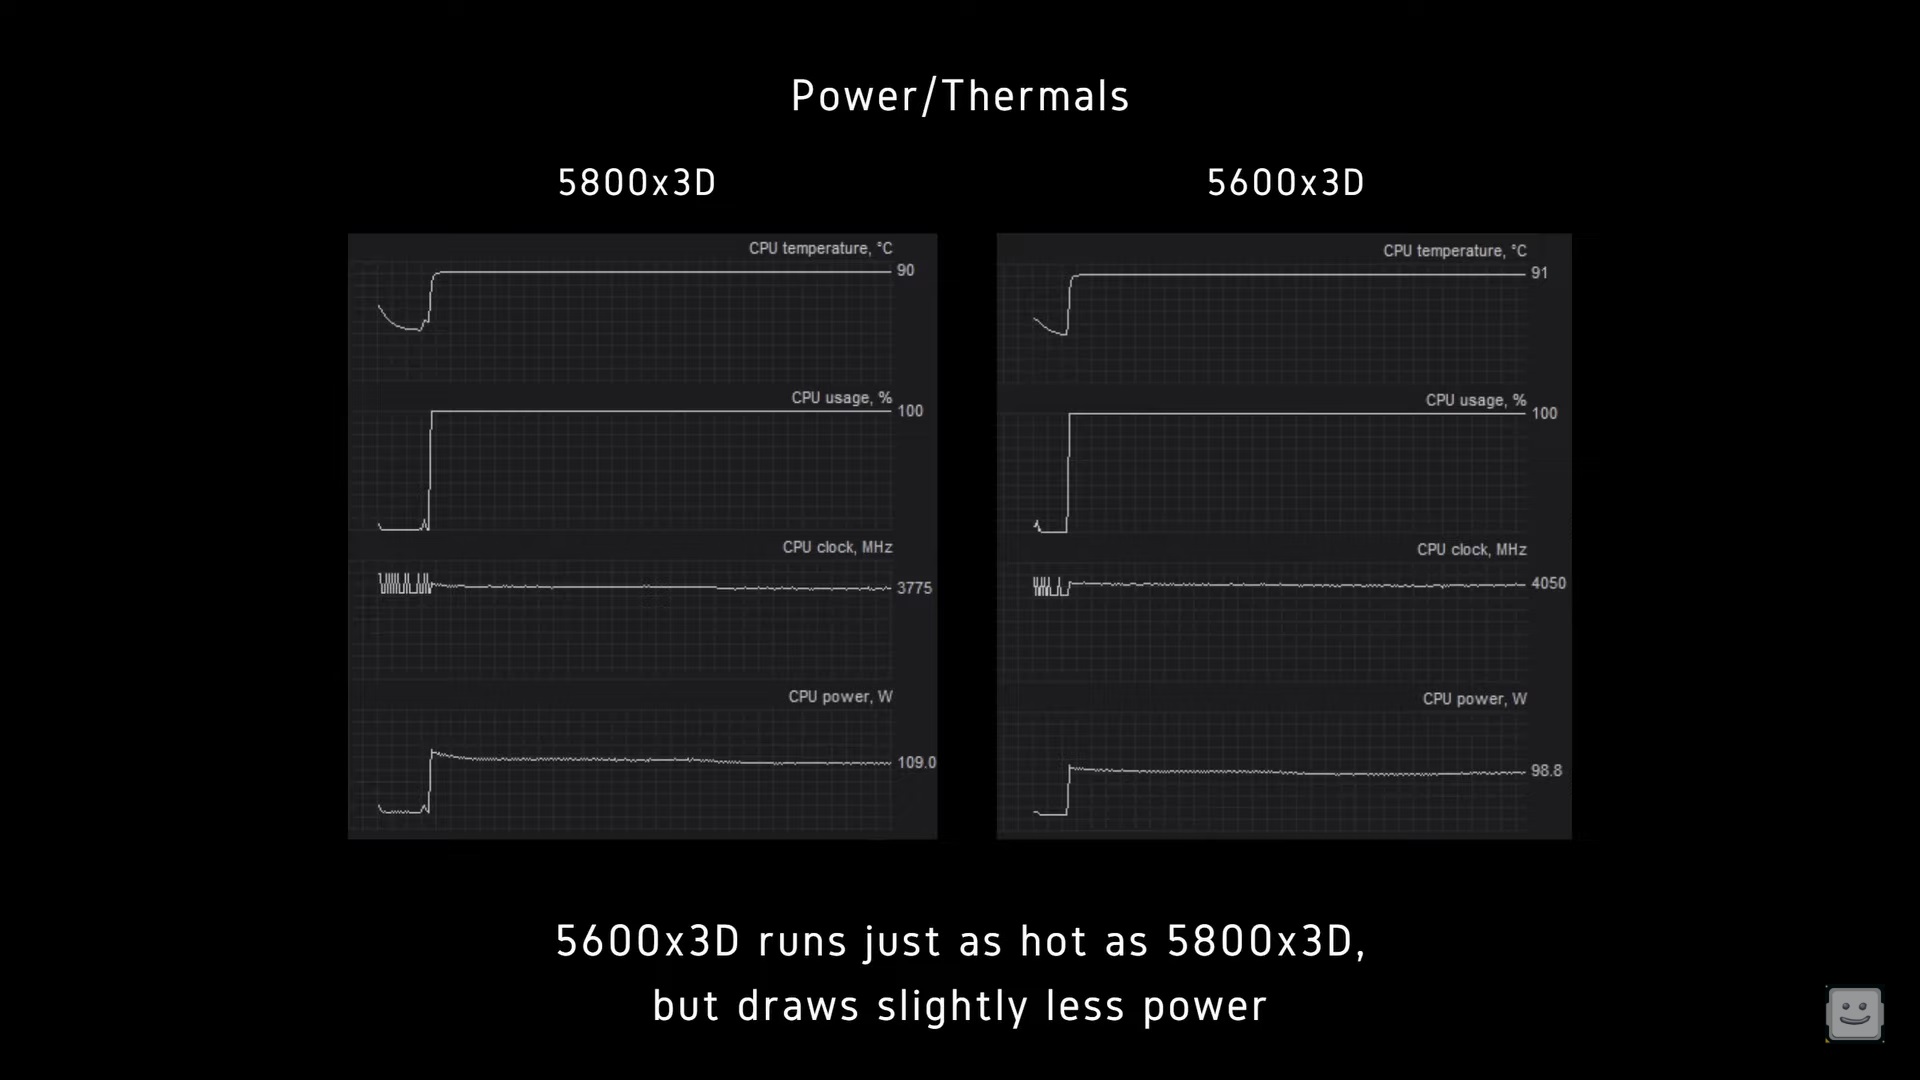 Benchmarks for the power consumption and thermals of the 5600X3D.